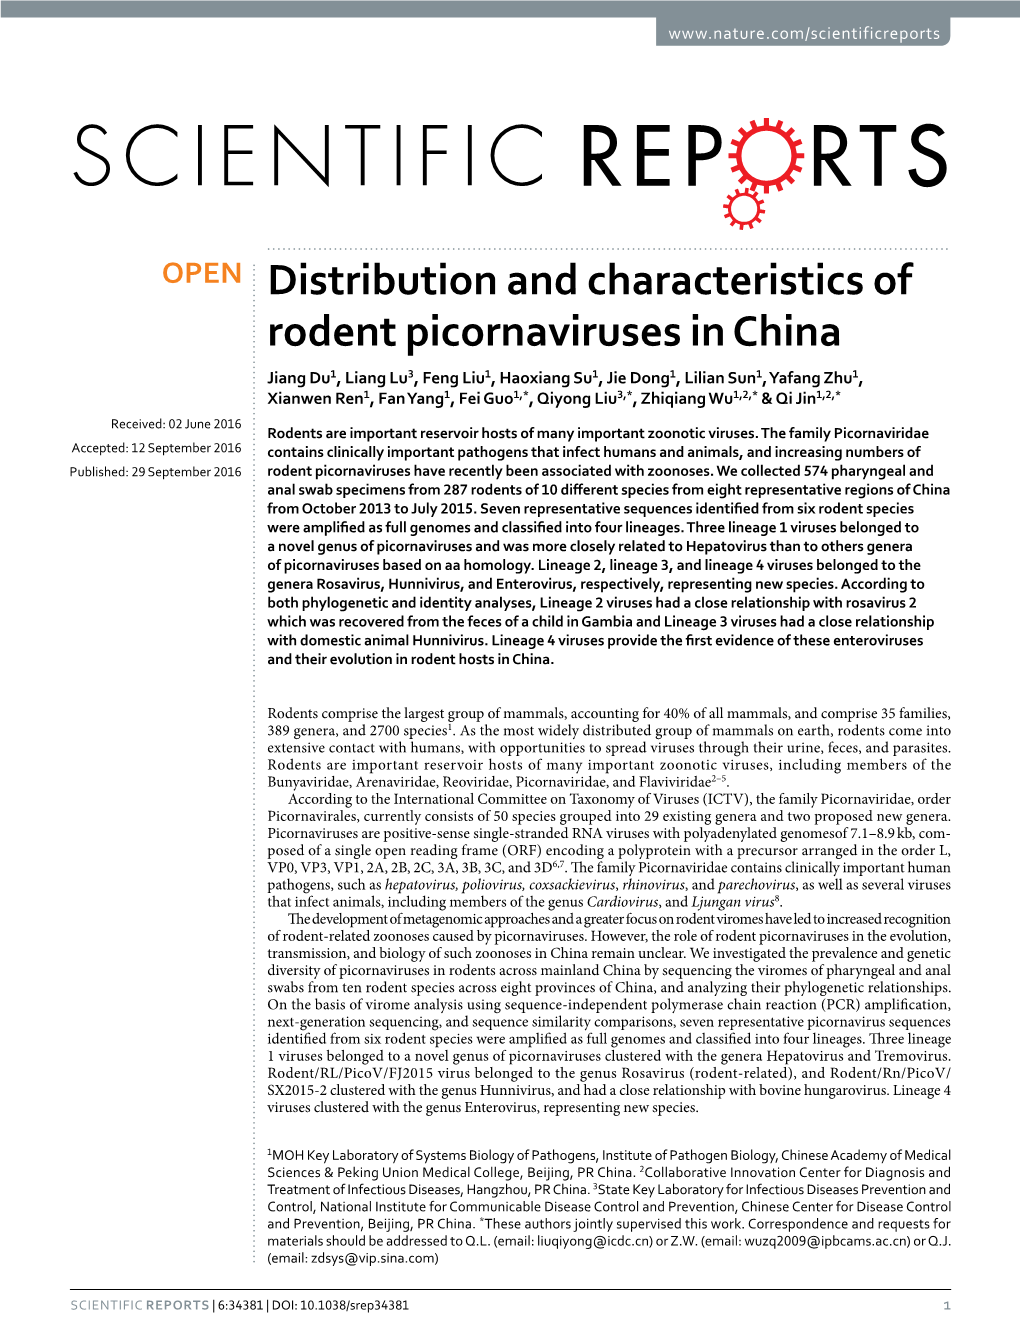 Distribution and Characteristics of Rodent Picornaviruses in China